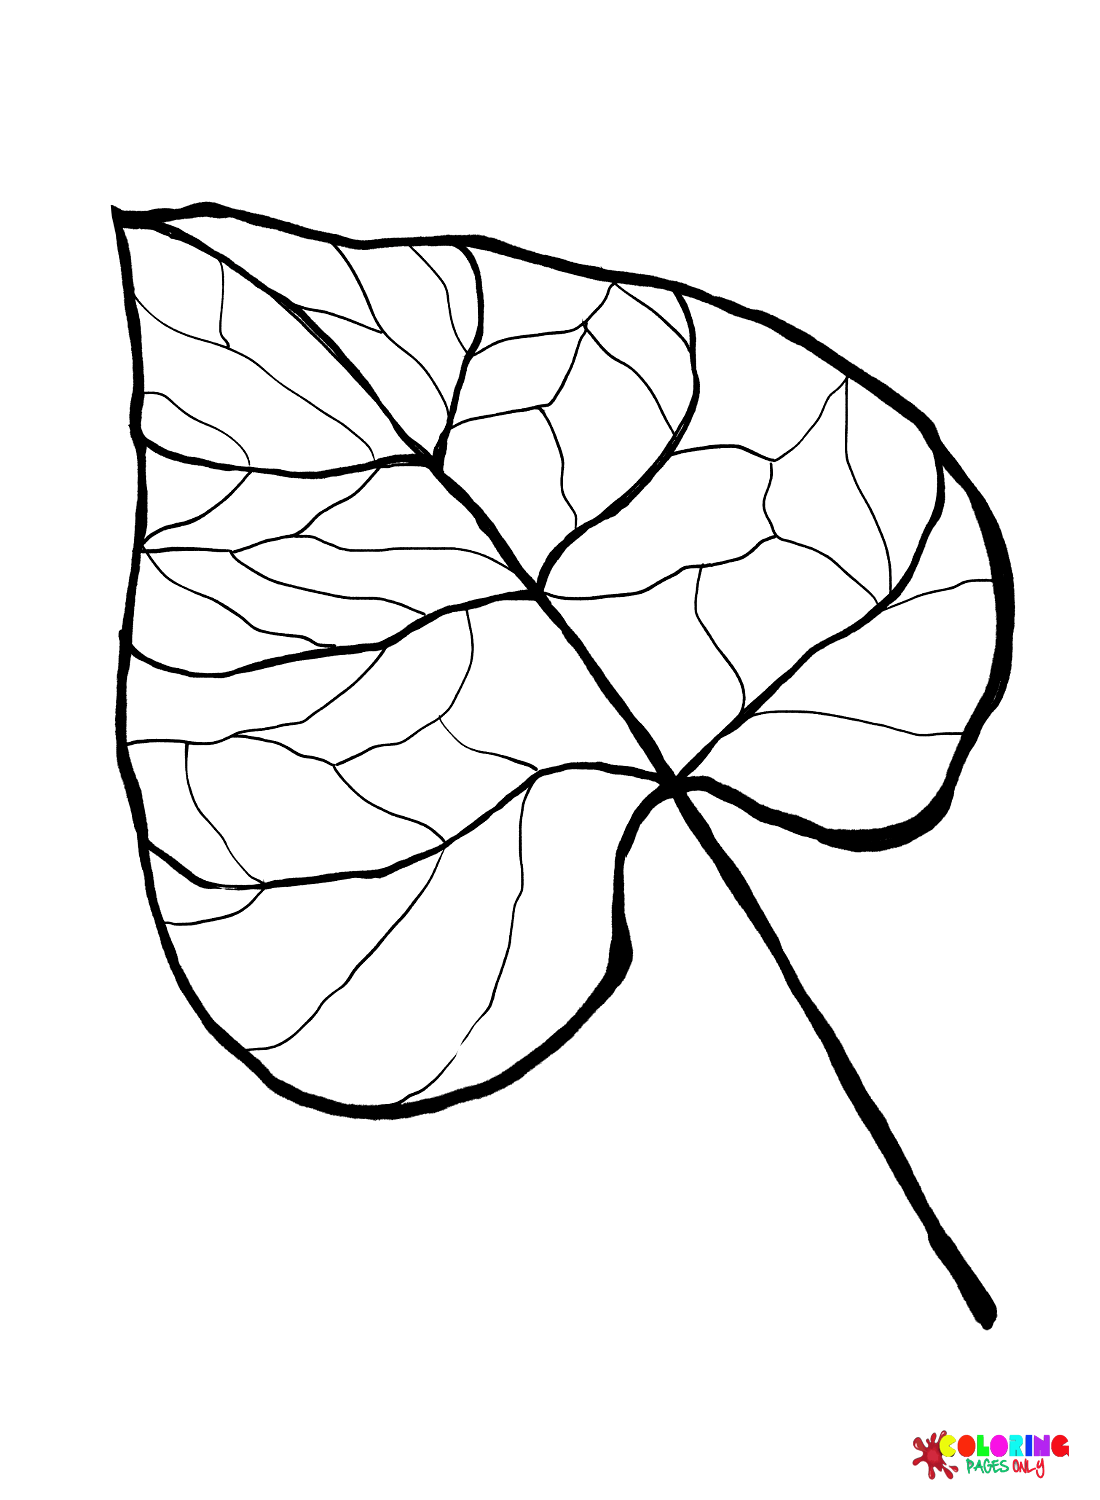 Catalpa Leaf from Leaves